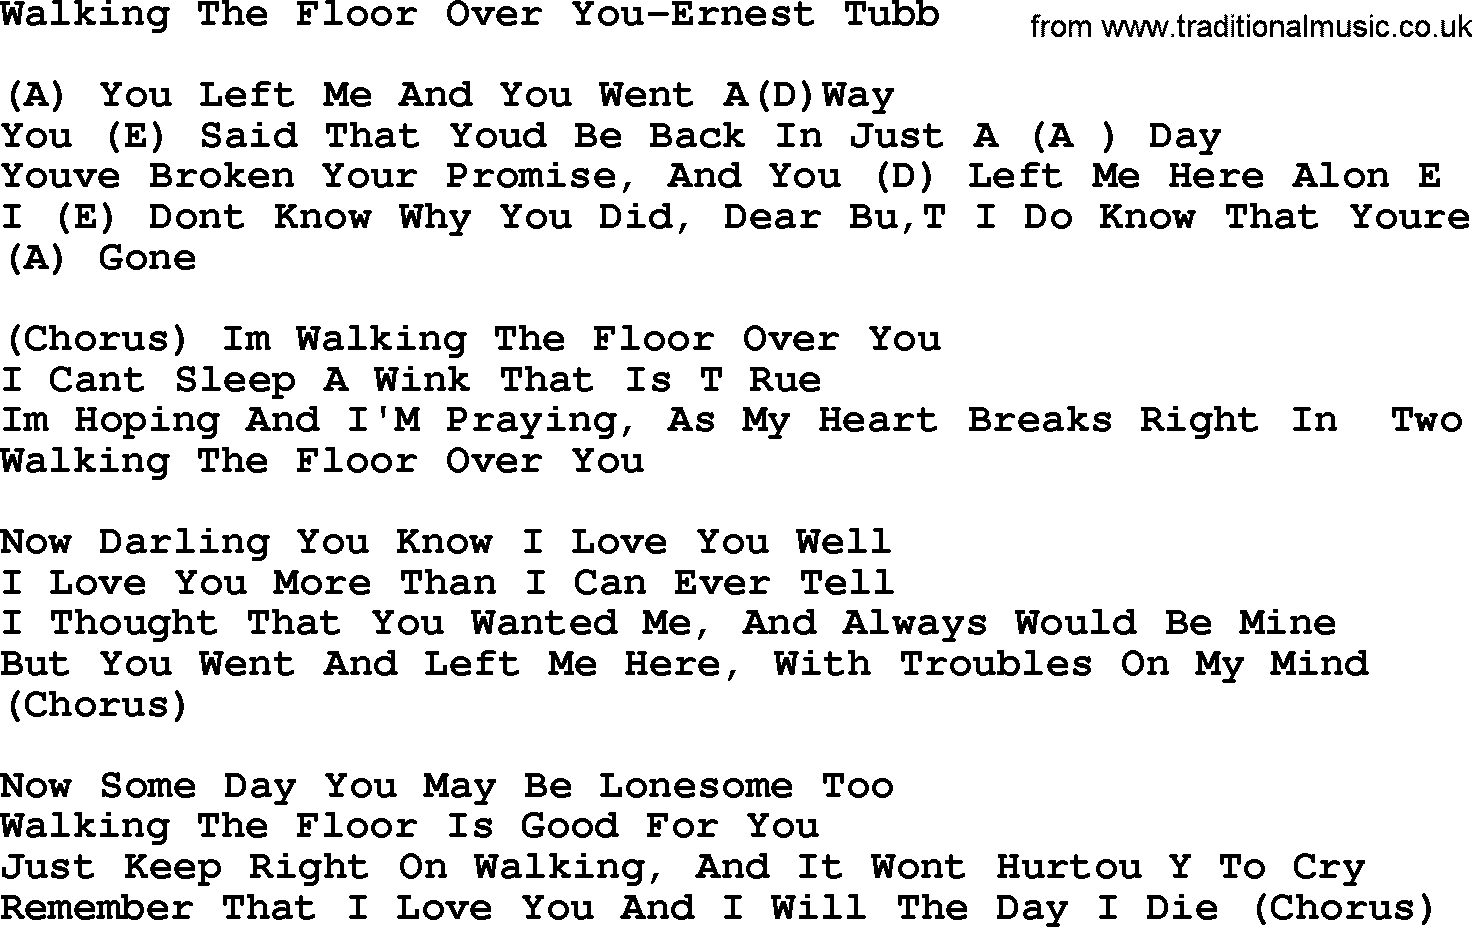 Country music song: Walking The Floor Over You-Ernest Tubb lyrics and chords